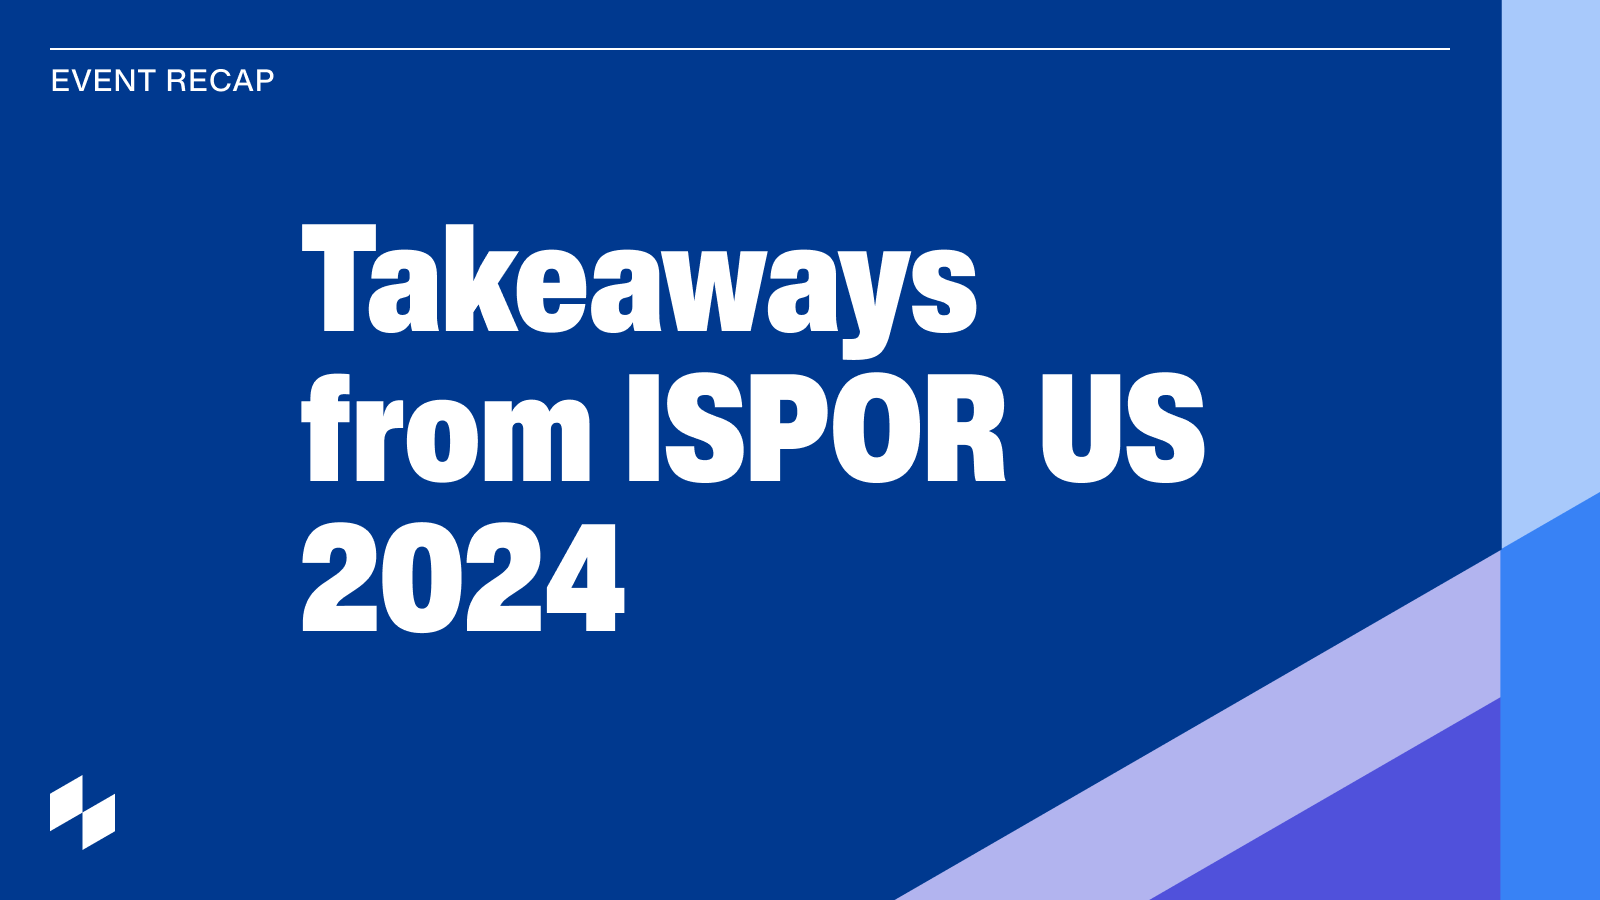 Unlock critical evidence to accelerate access to cancer treatments worldwide: reflections from ISPOR 2024